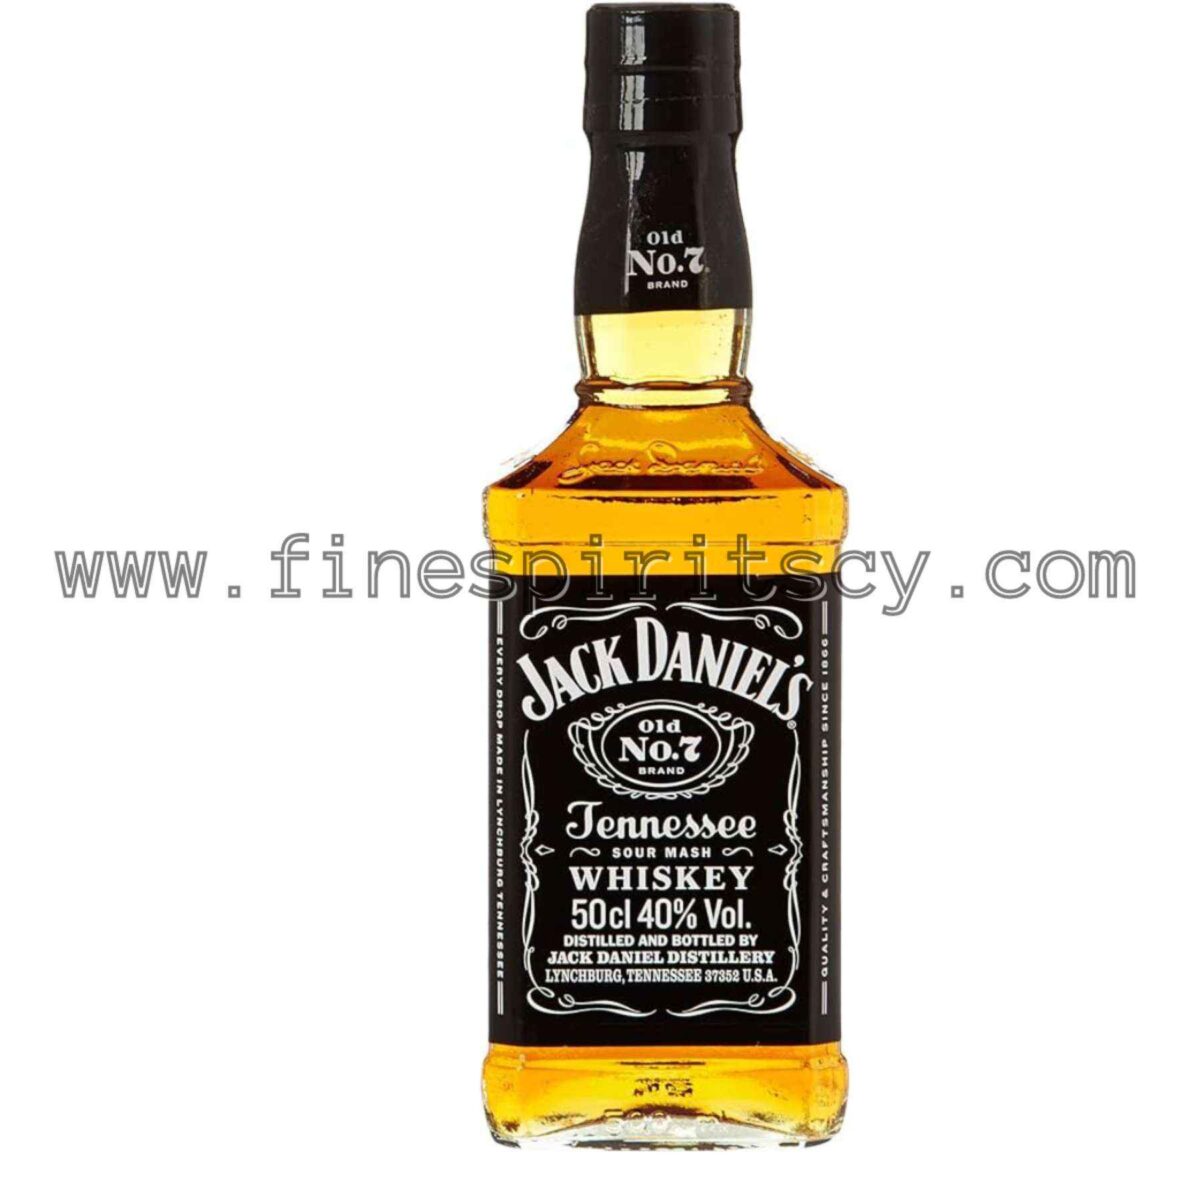 Jack Daniels Old No 7 Tennessee Whiskey 500ml 0.5L 50cl Bourbon America